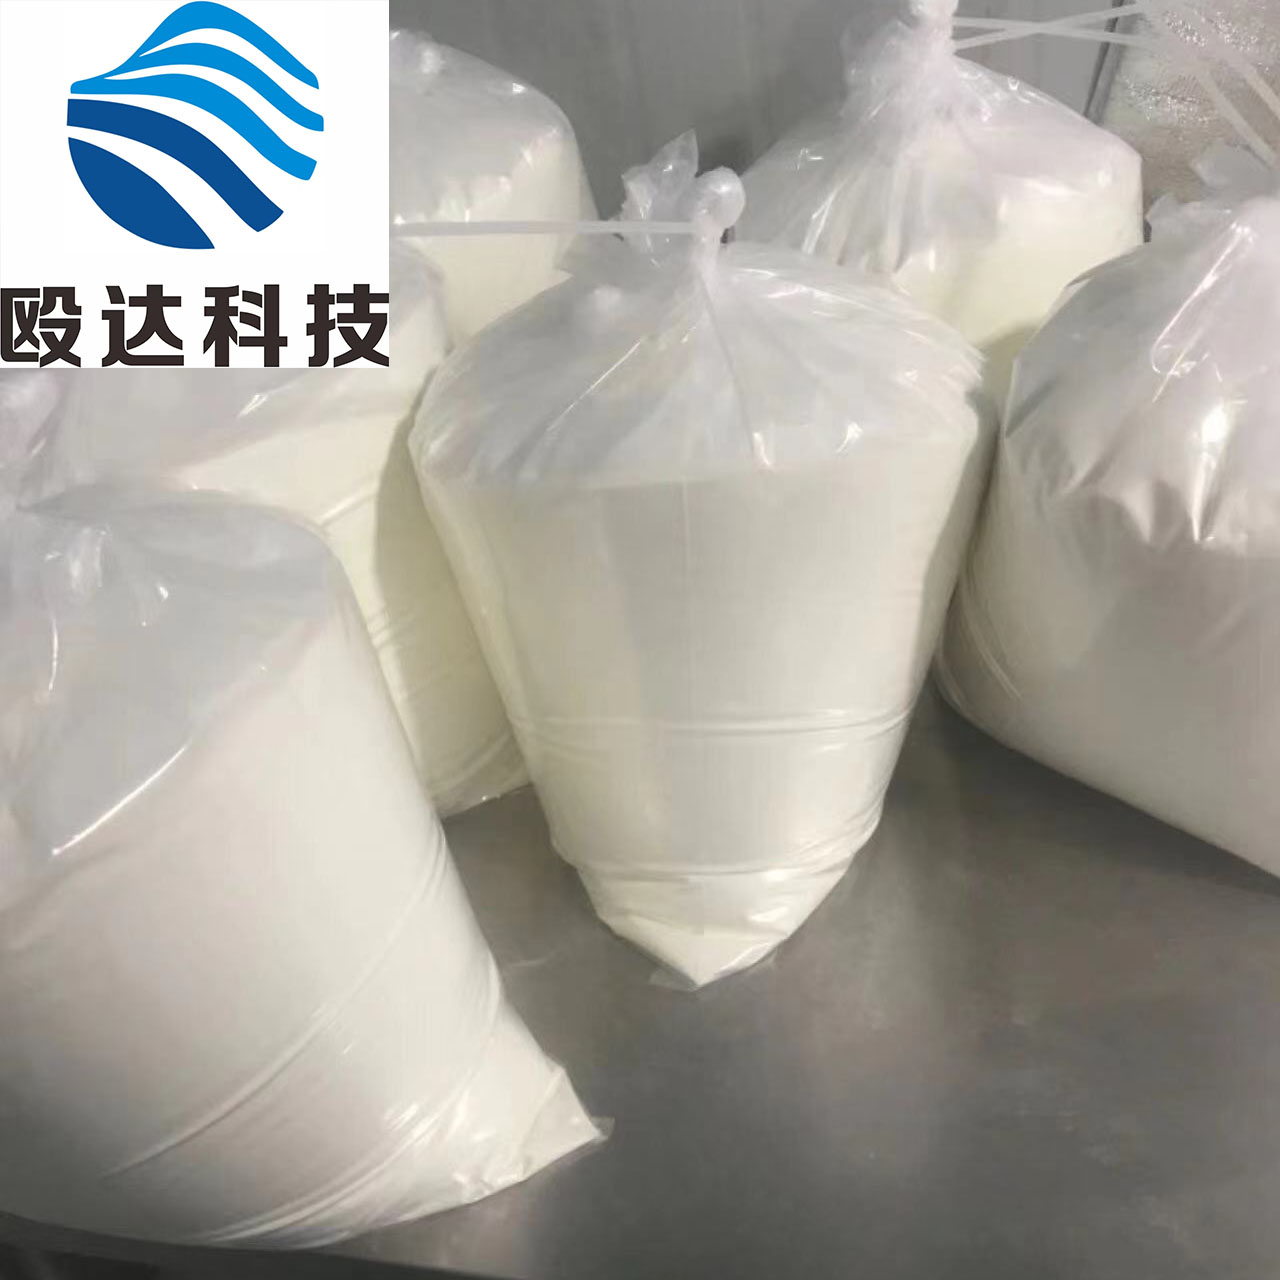 Vincristine sulfate CAS 2068-78-2 for Scientific Research Chemical Reagents Use only Ouda